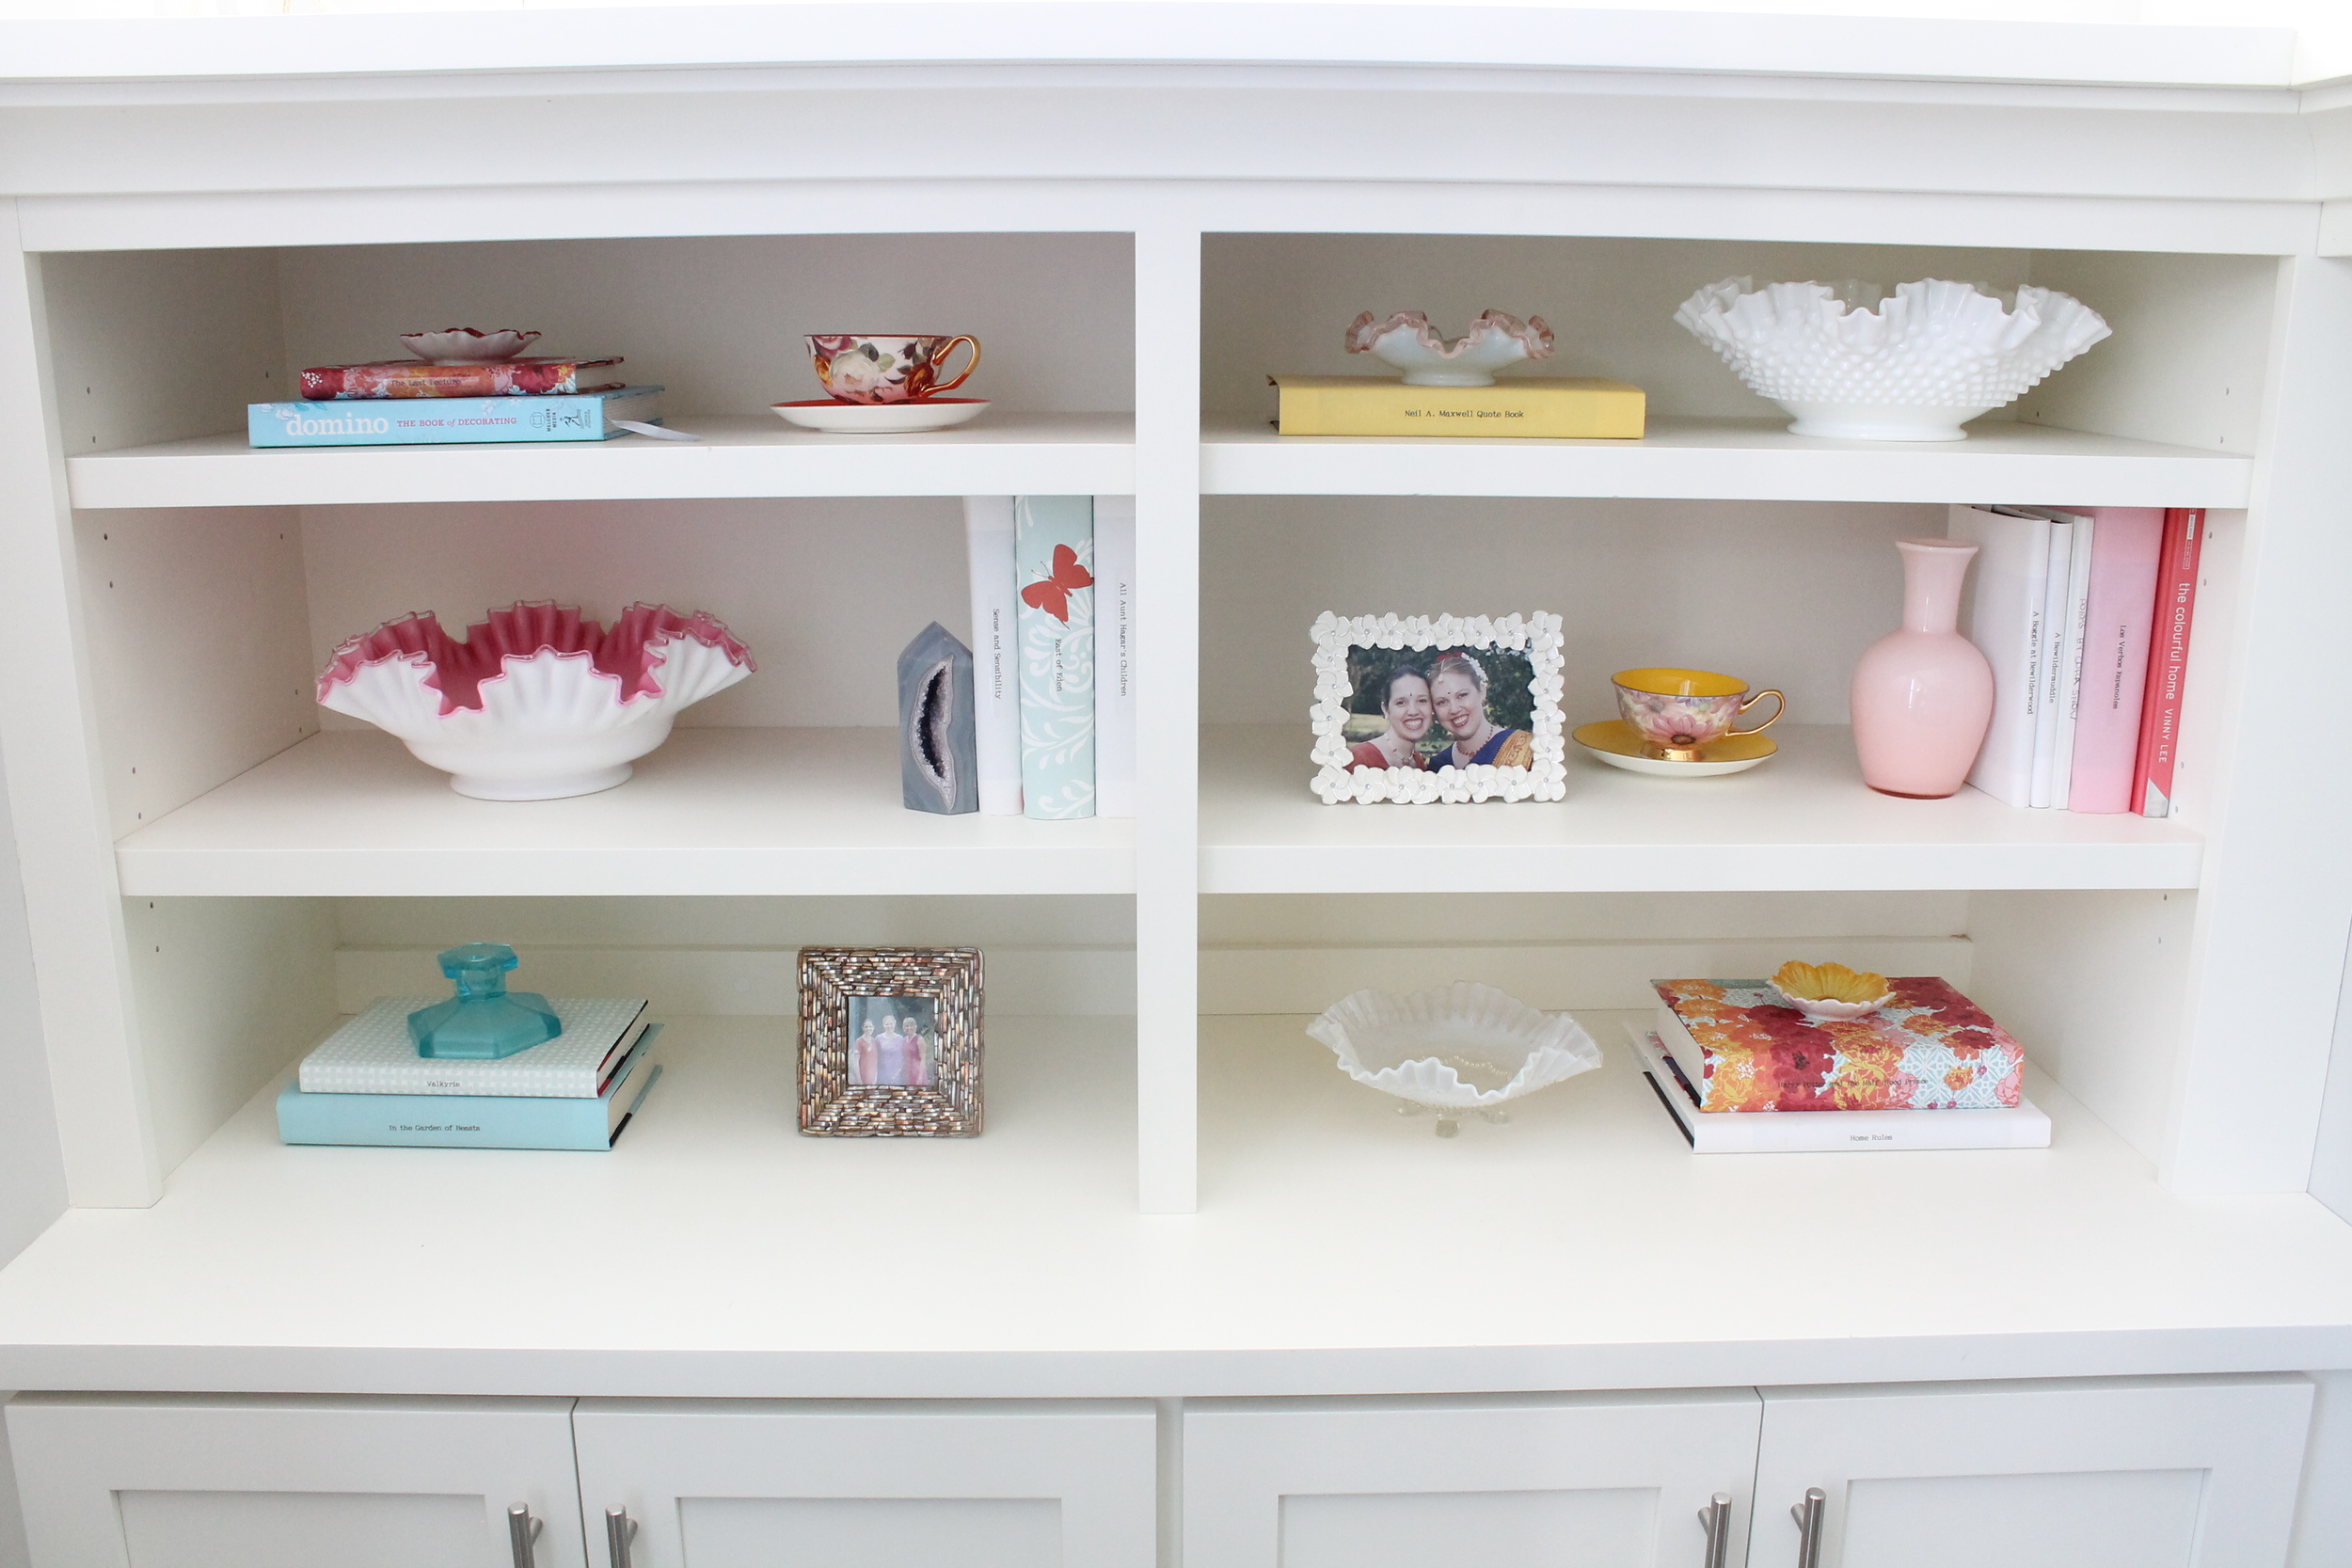 Built in Bookshelf styling with paper covered books and vintage ruffled glass bowls.